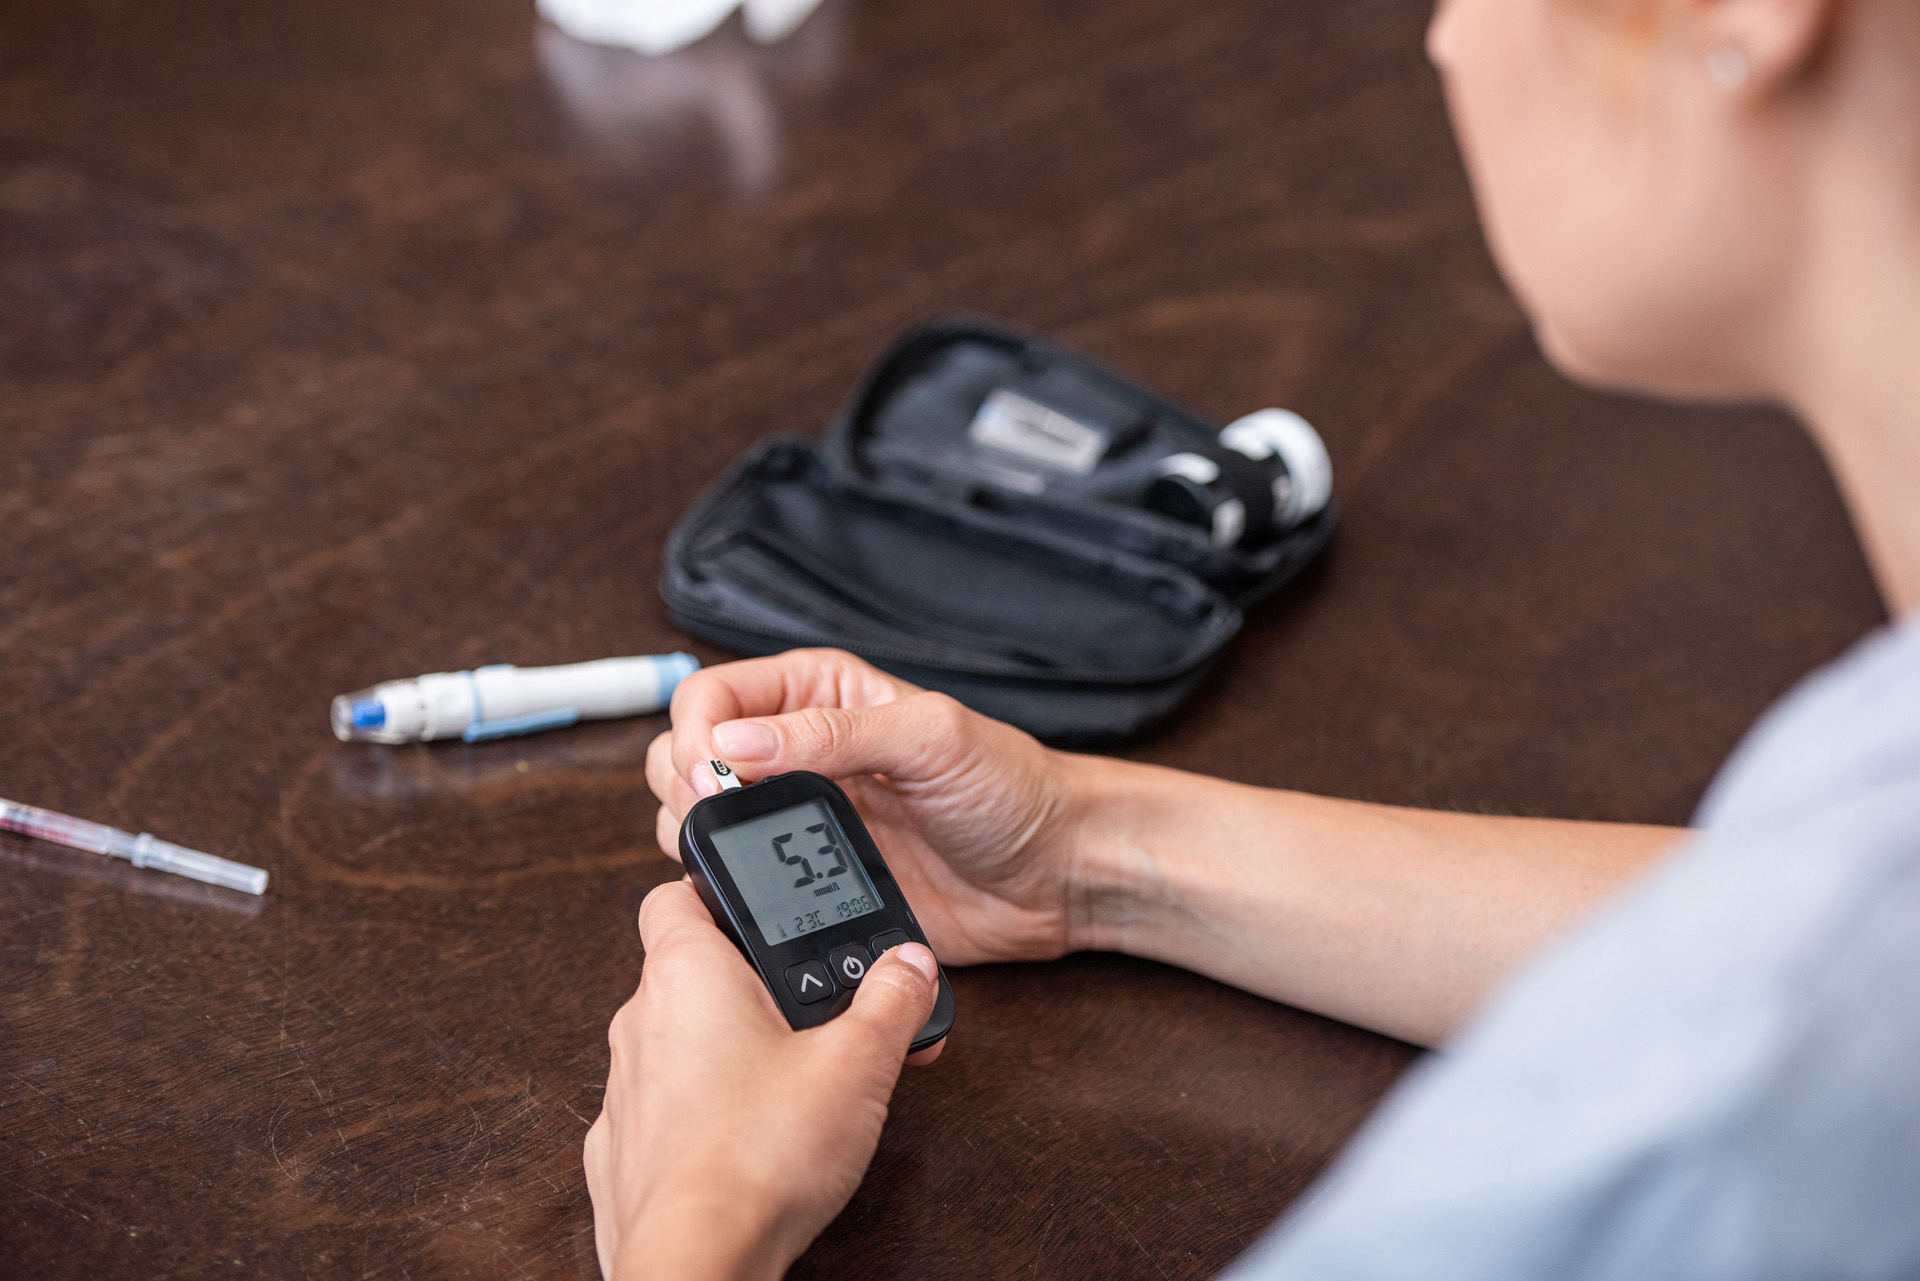 A patient with diabetes checks her blood glucose levels